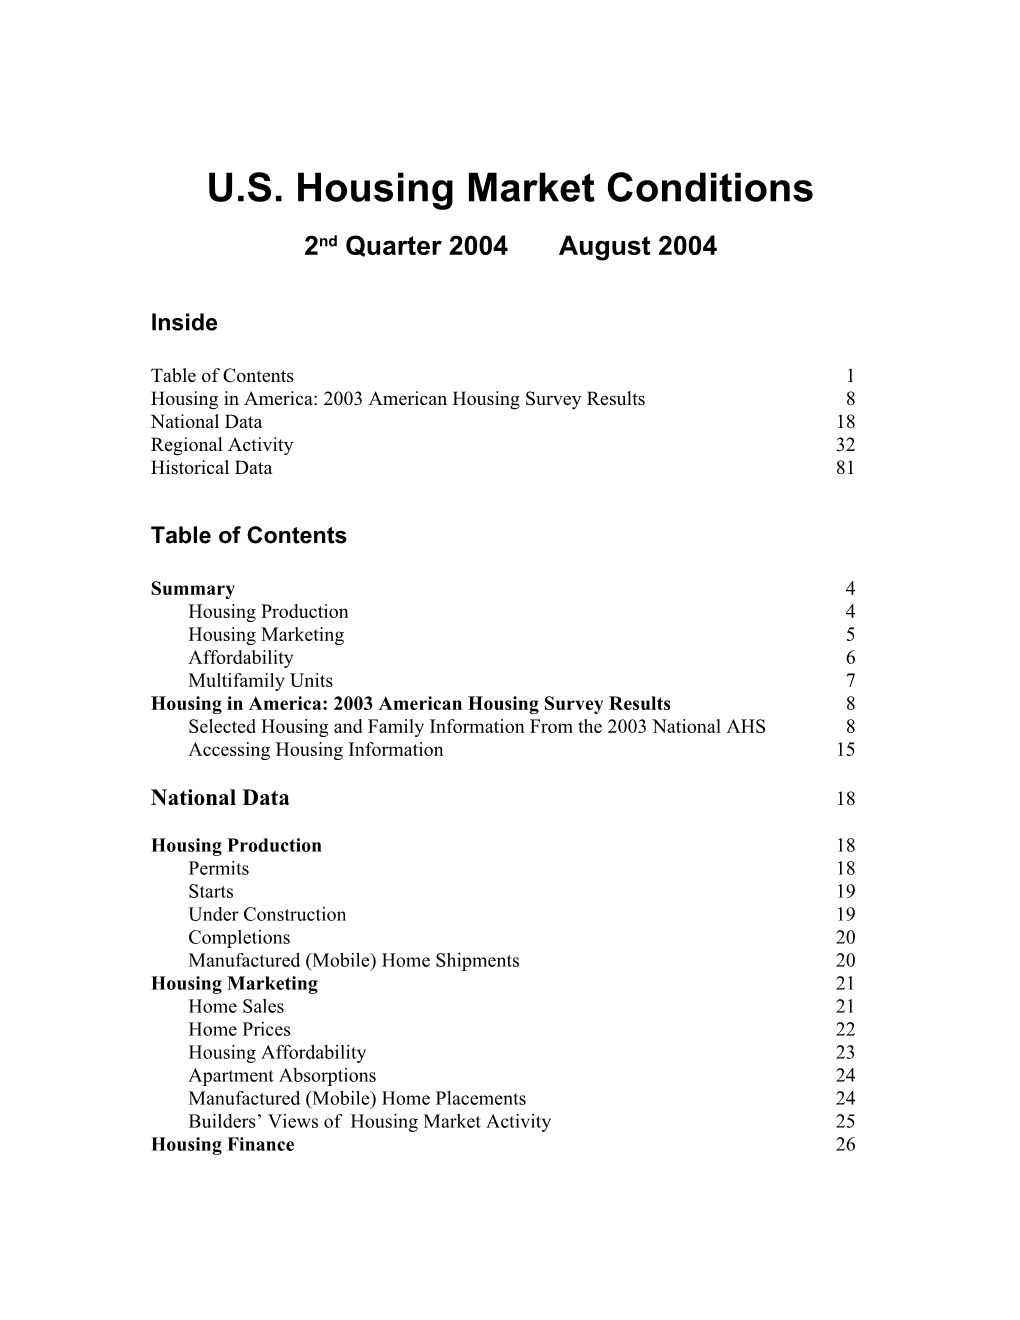 Housing in America: 2003 American Housing Survey Results8